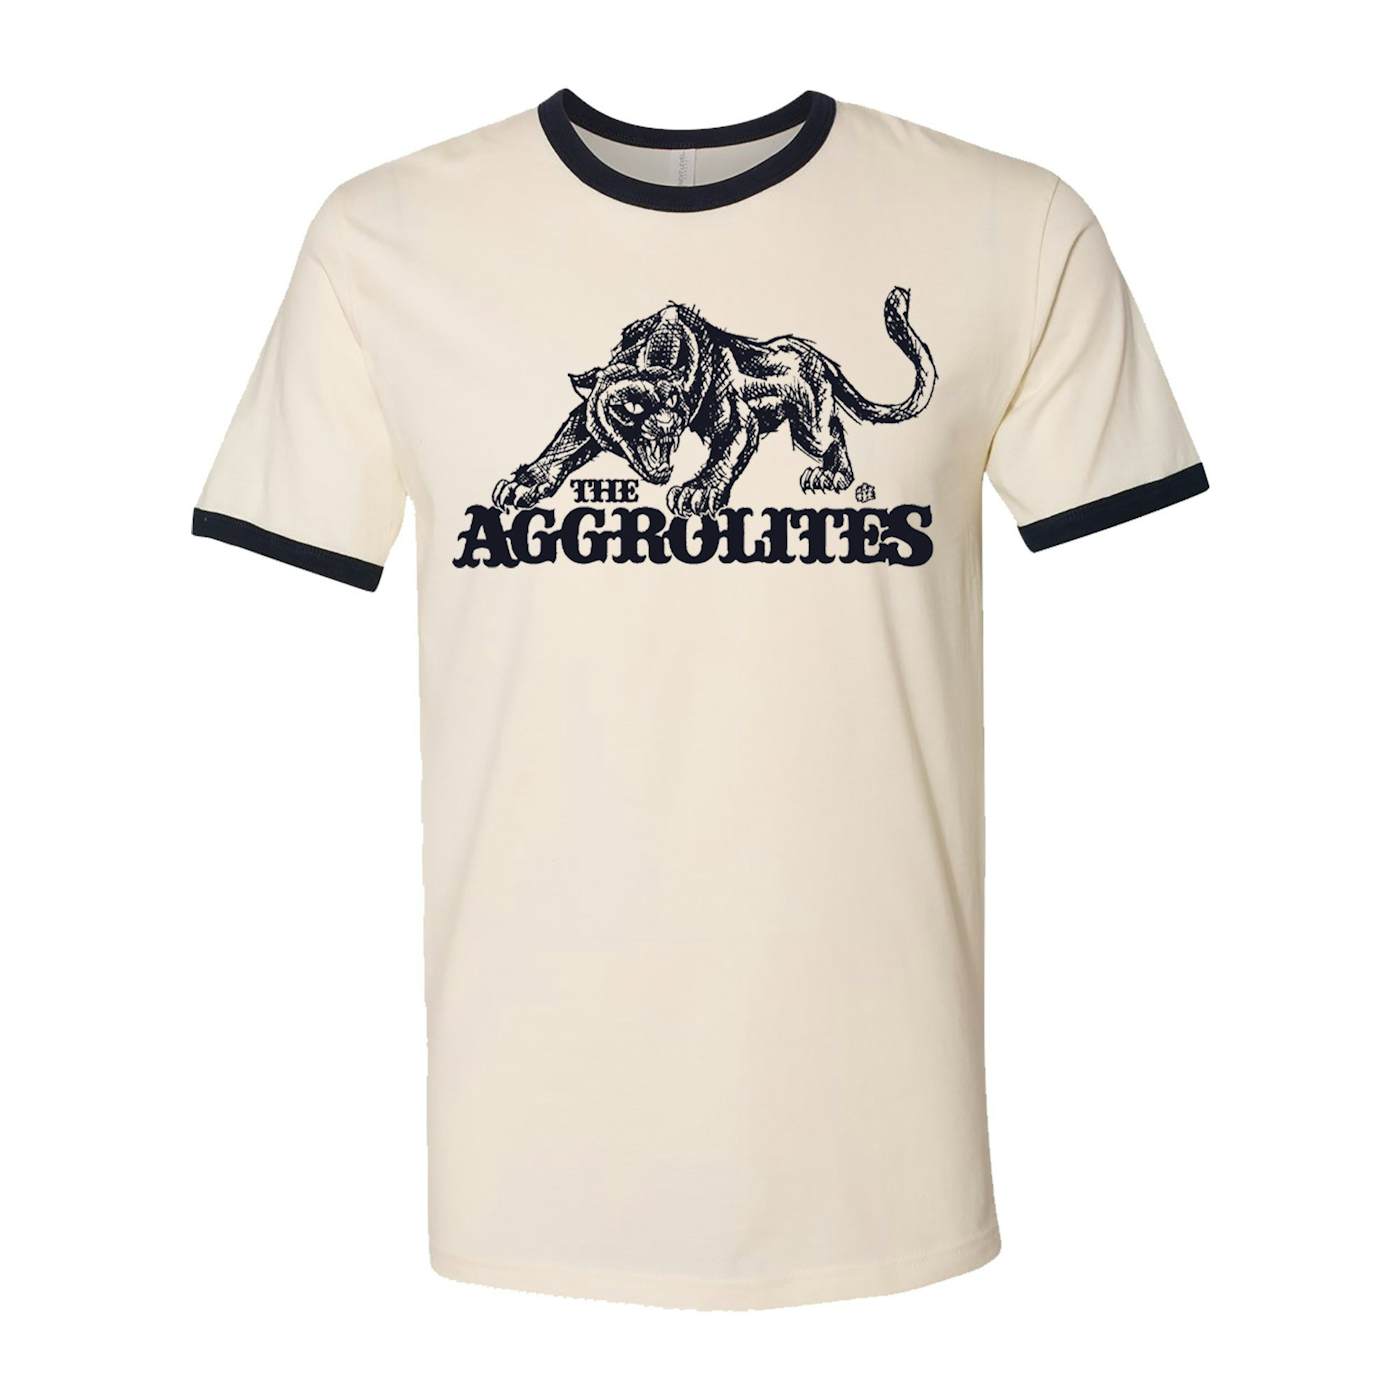 The Aggrolites - Aggropanther - Natural & Navy Blue Ringer - T-Shirt